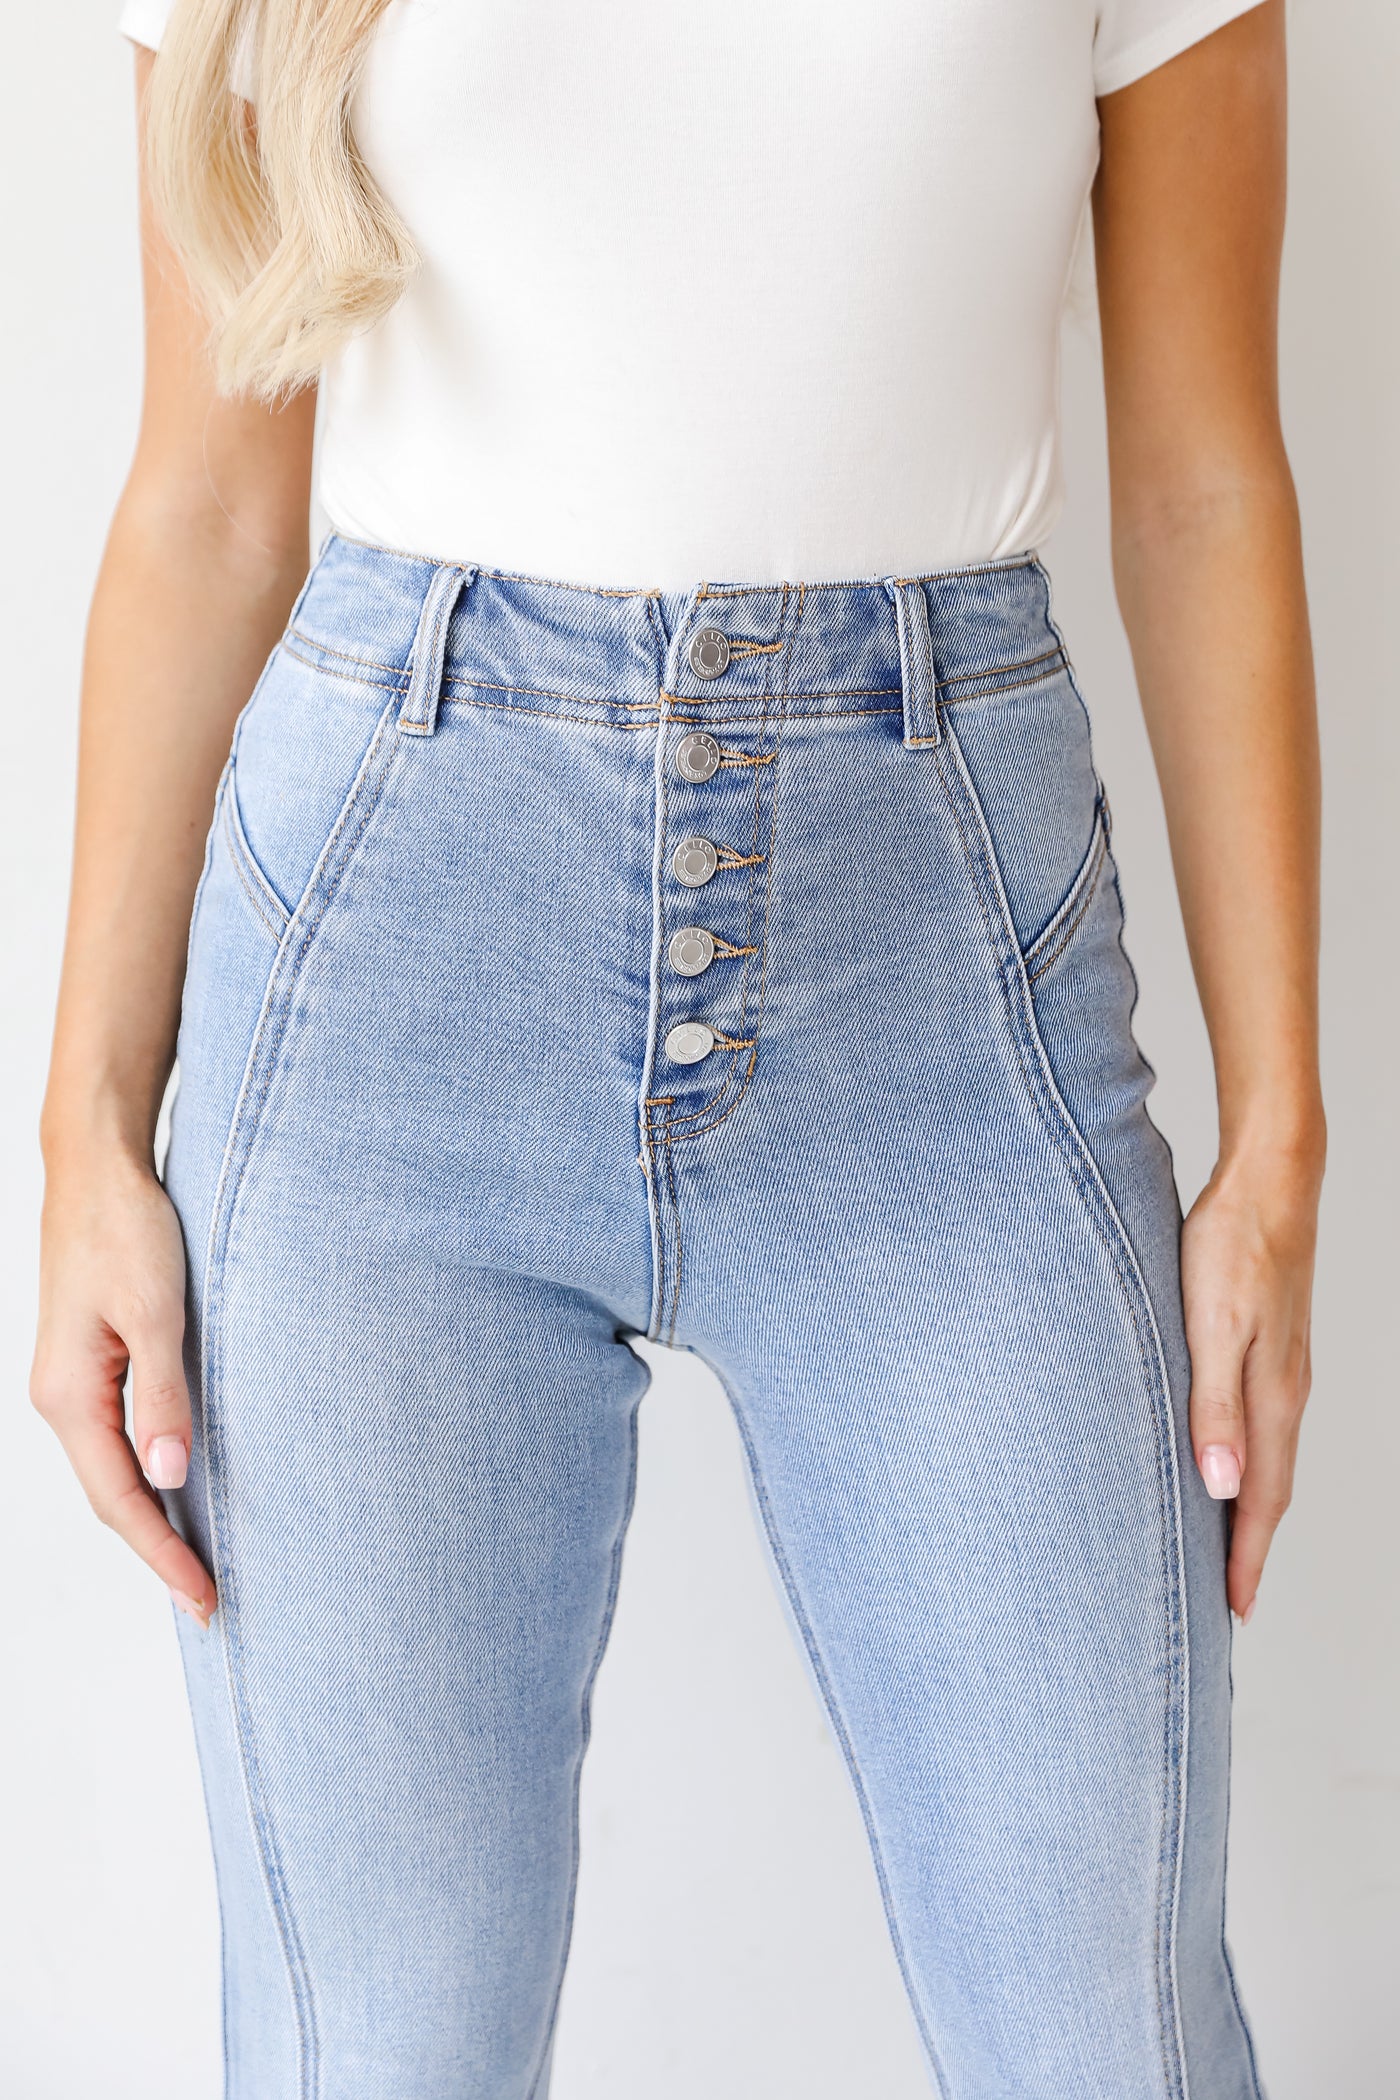 Flare Jeans close up